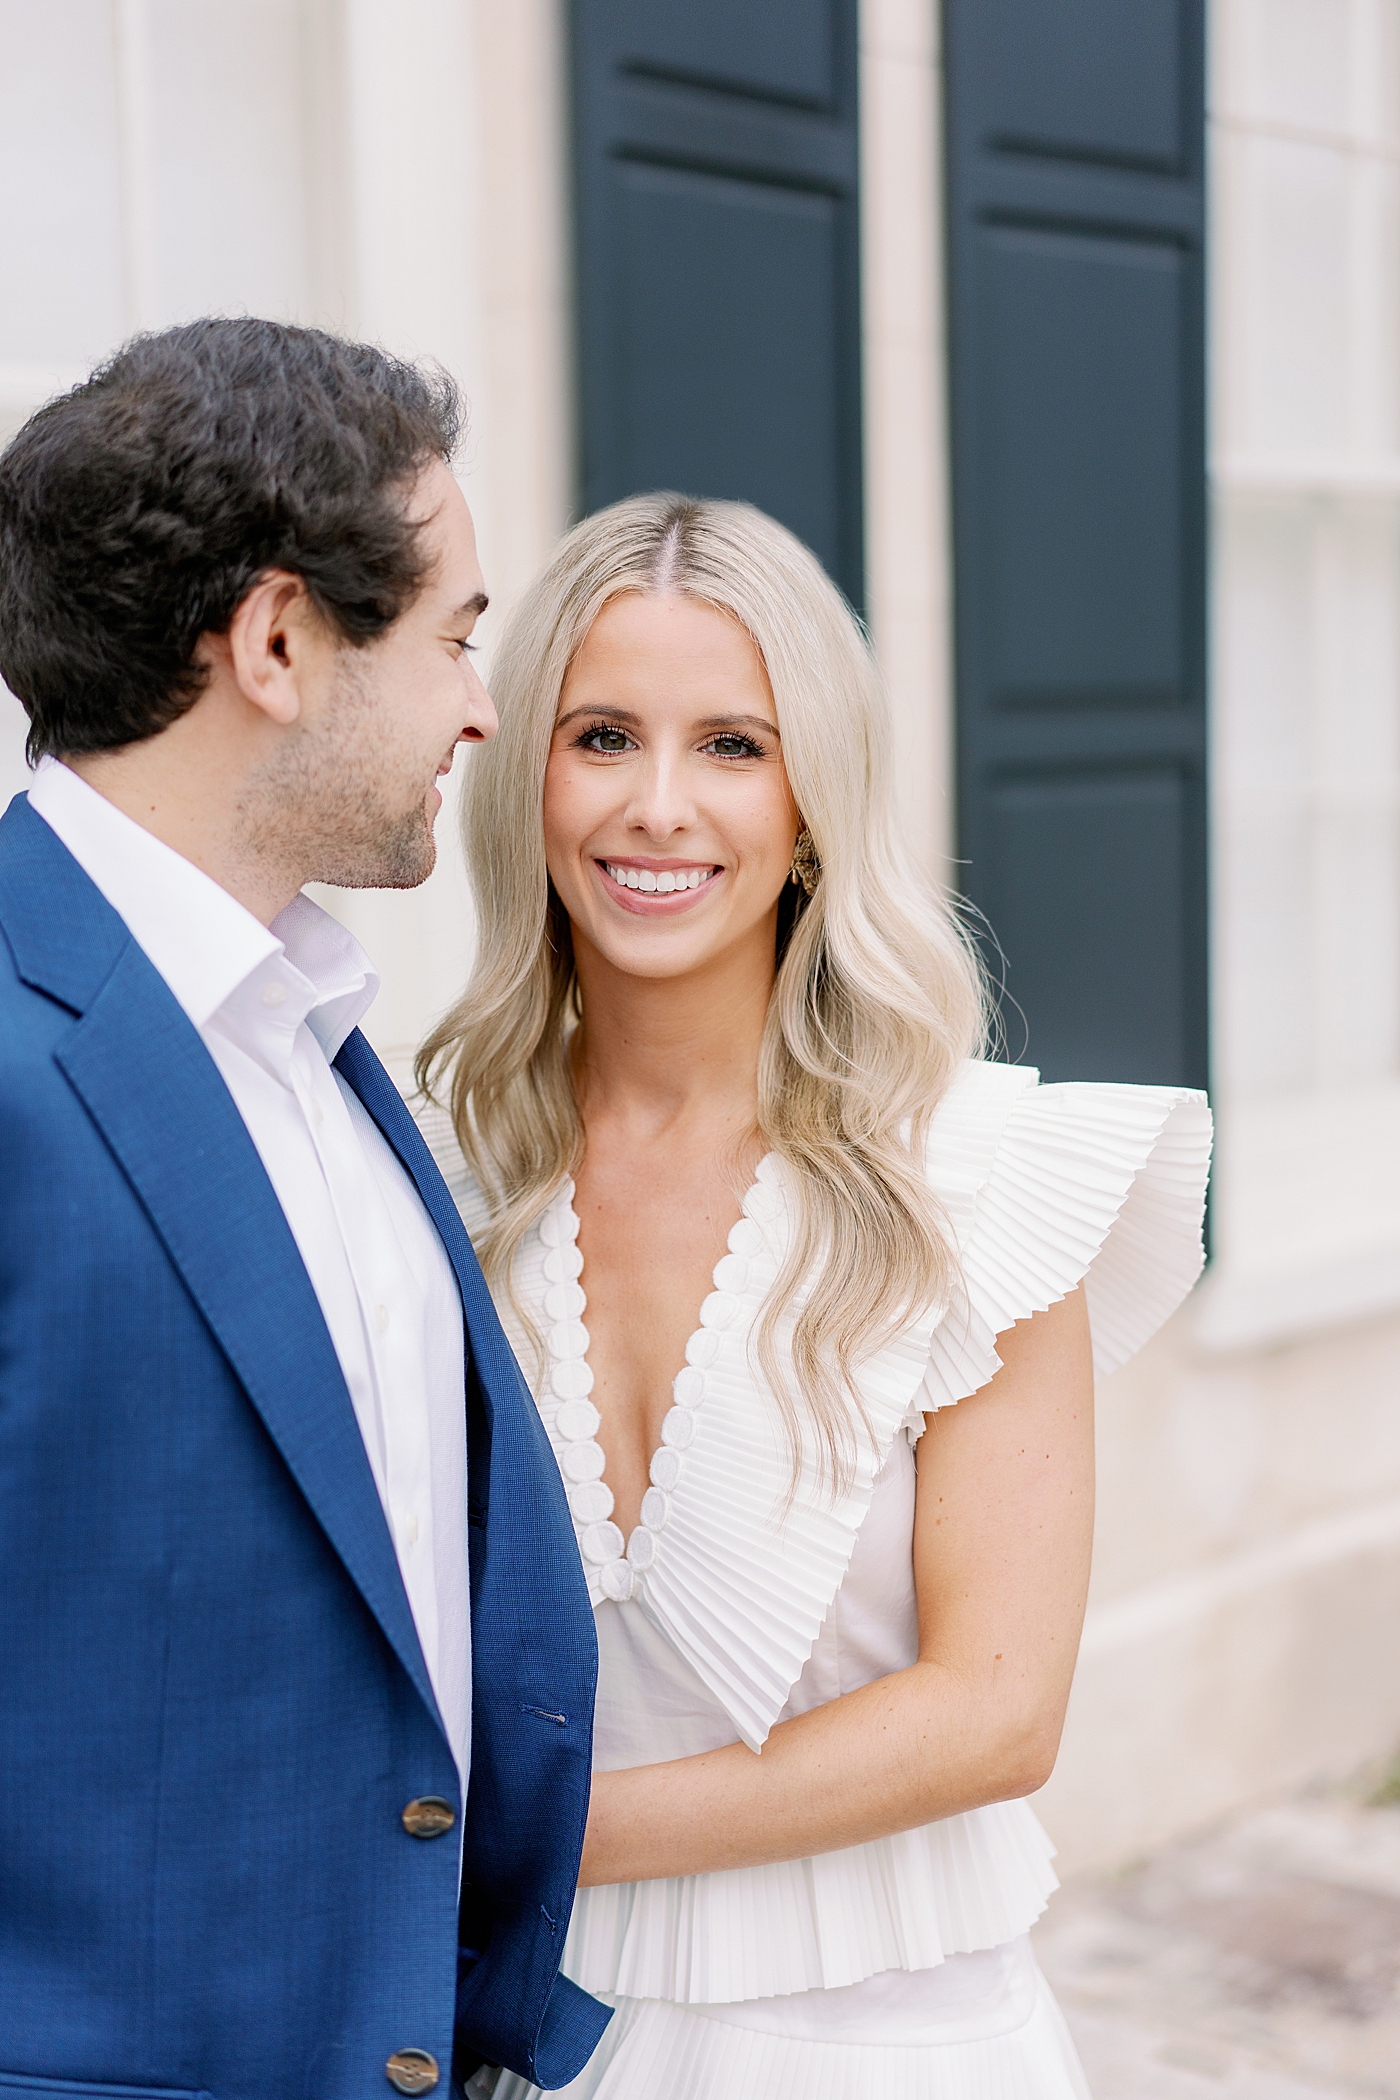 Bride looking at the camera while groom looks at her | Intimate Charleston Engagement Session with Annie Laura Photo